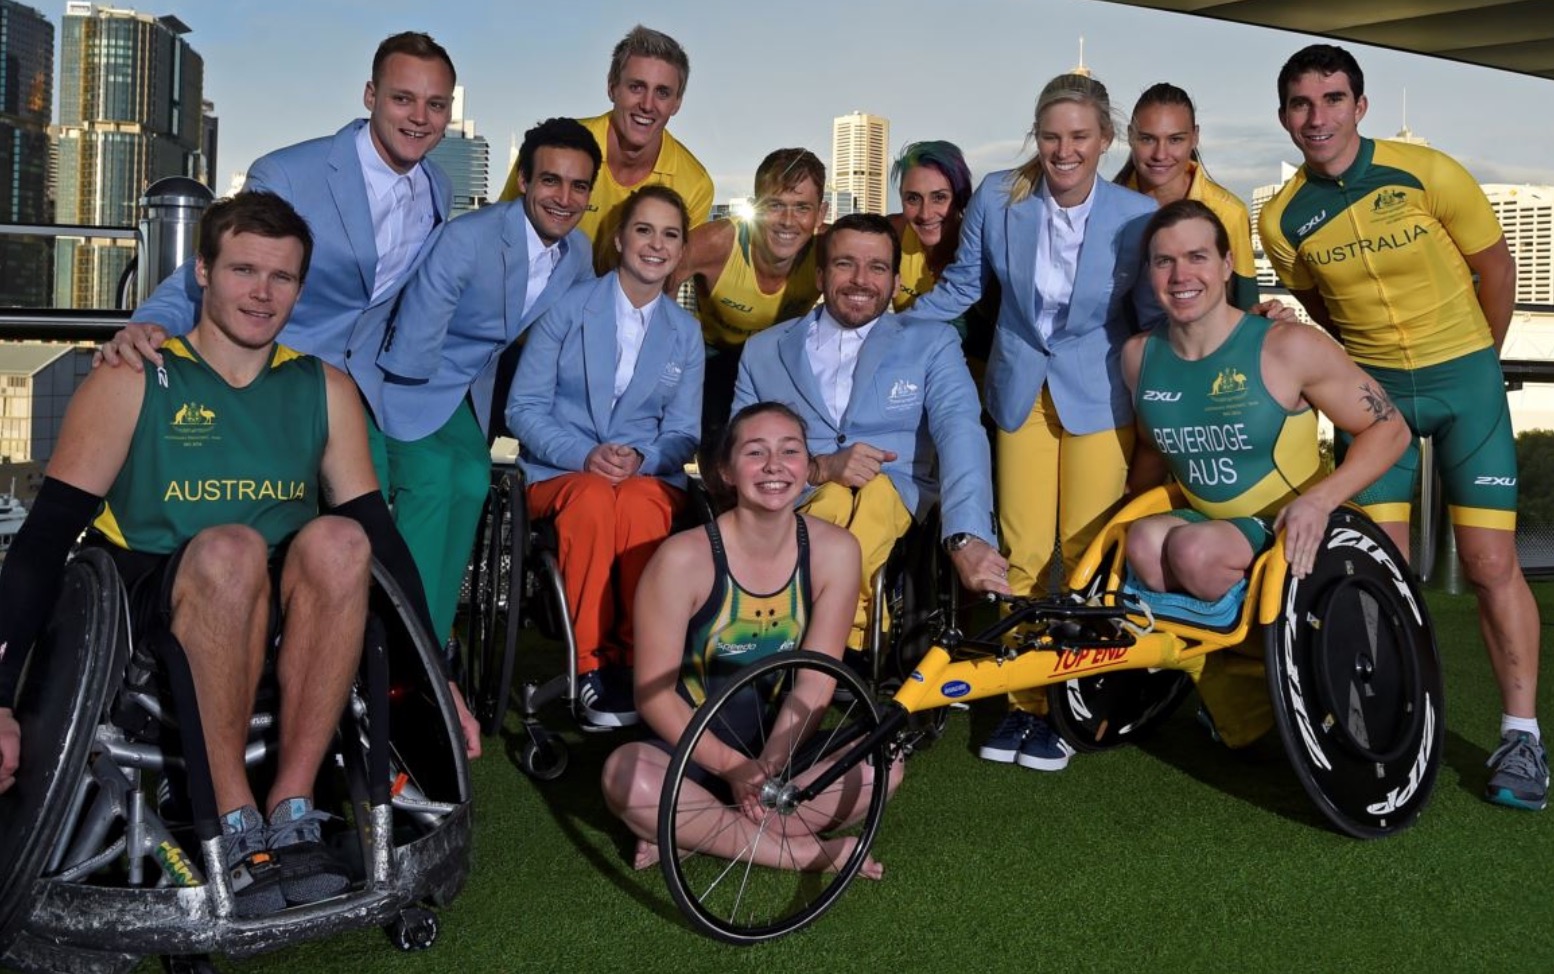  image source - Australian Paralympic Committee 